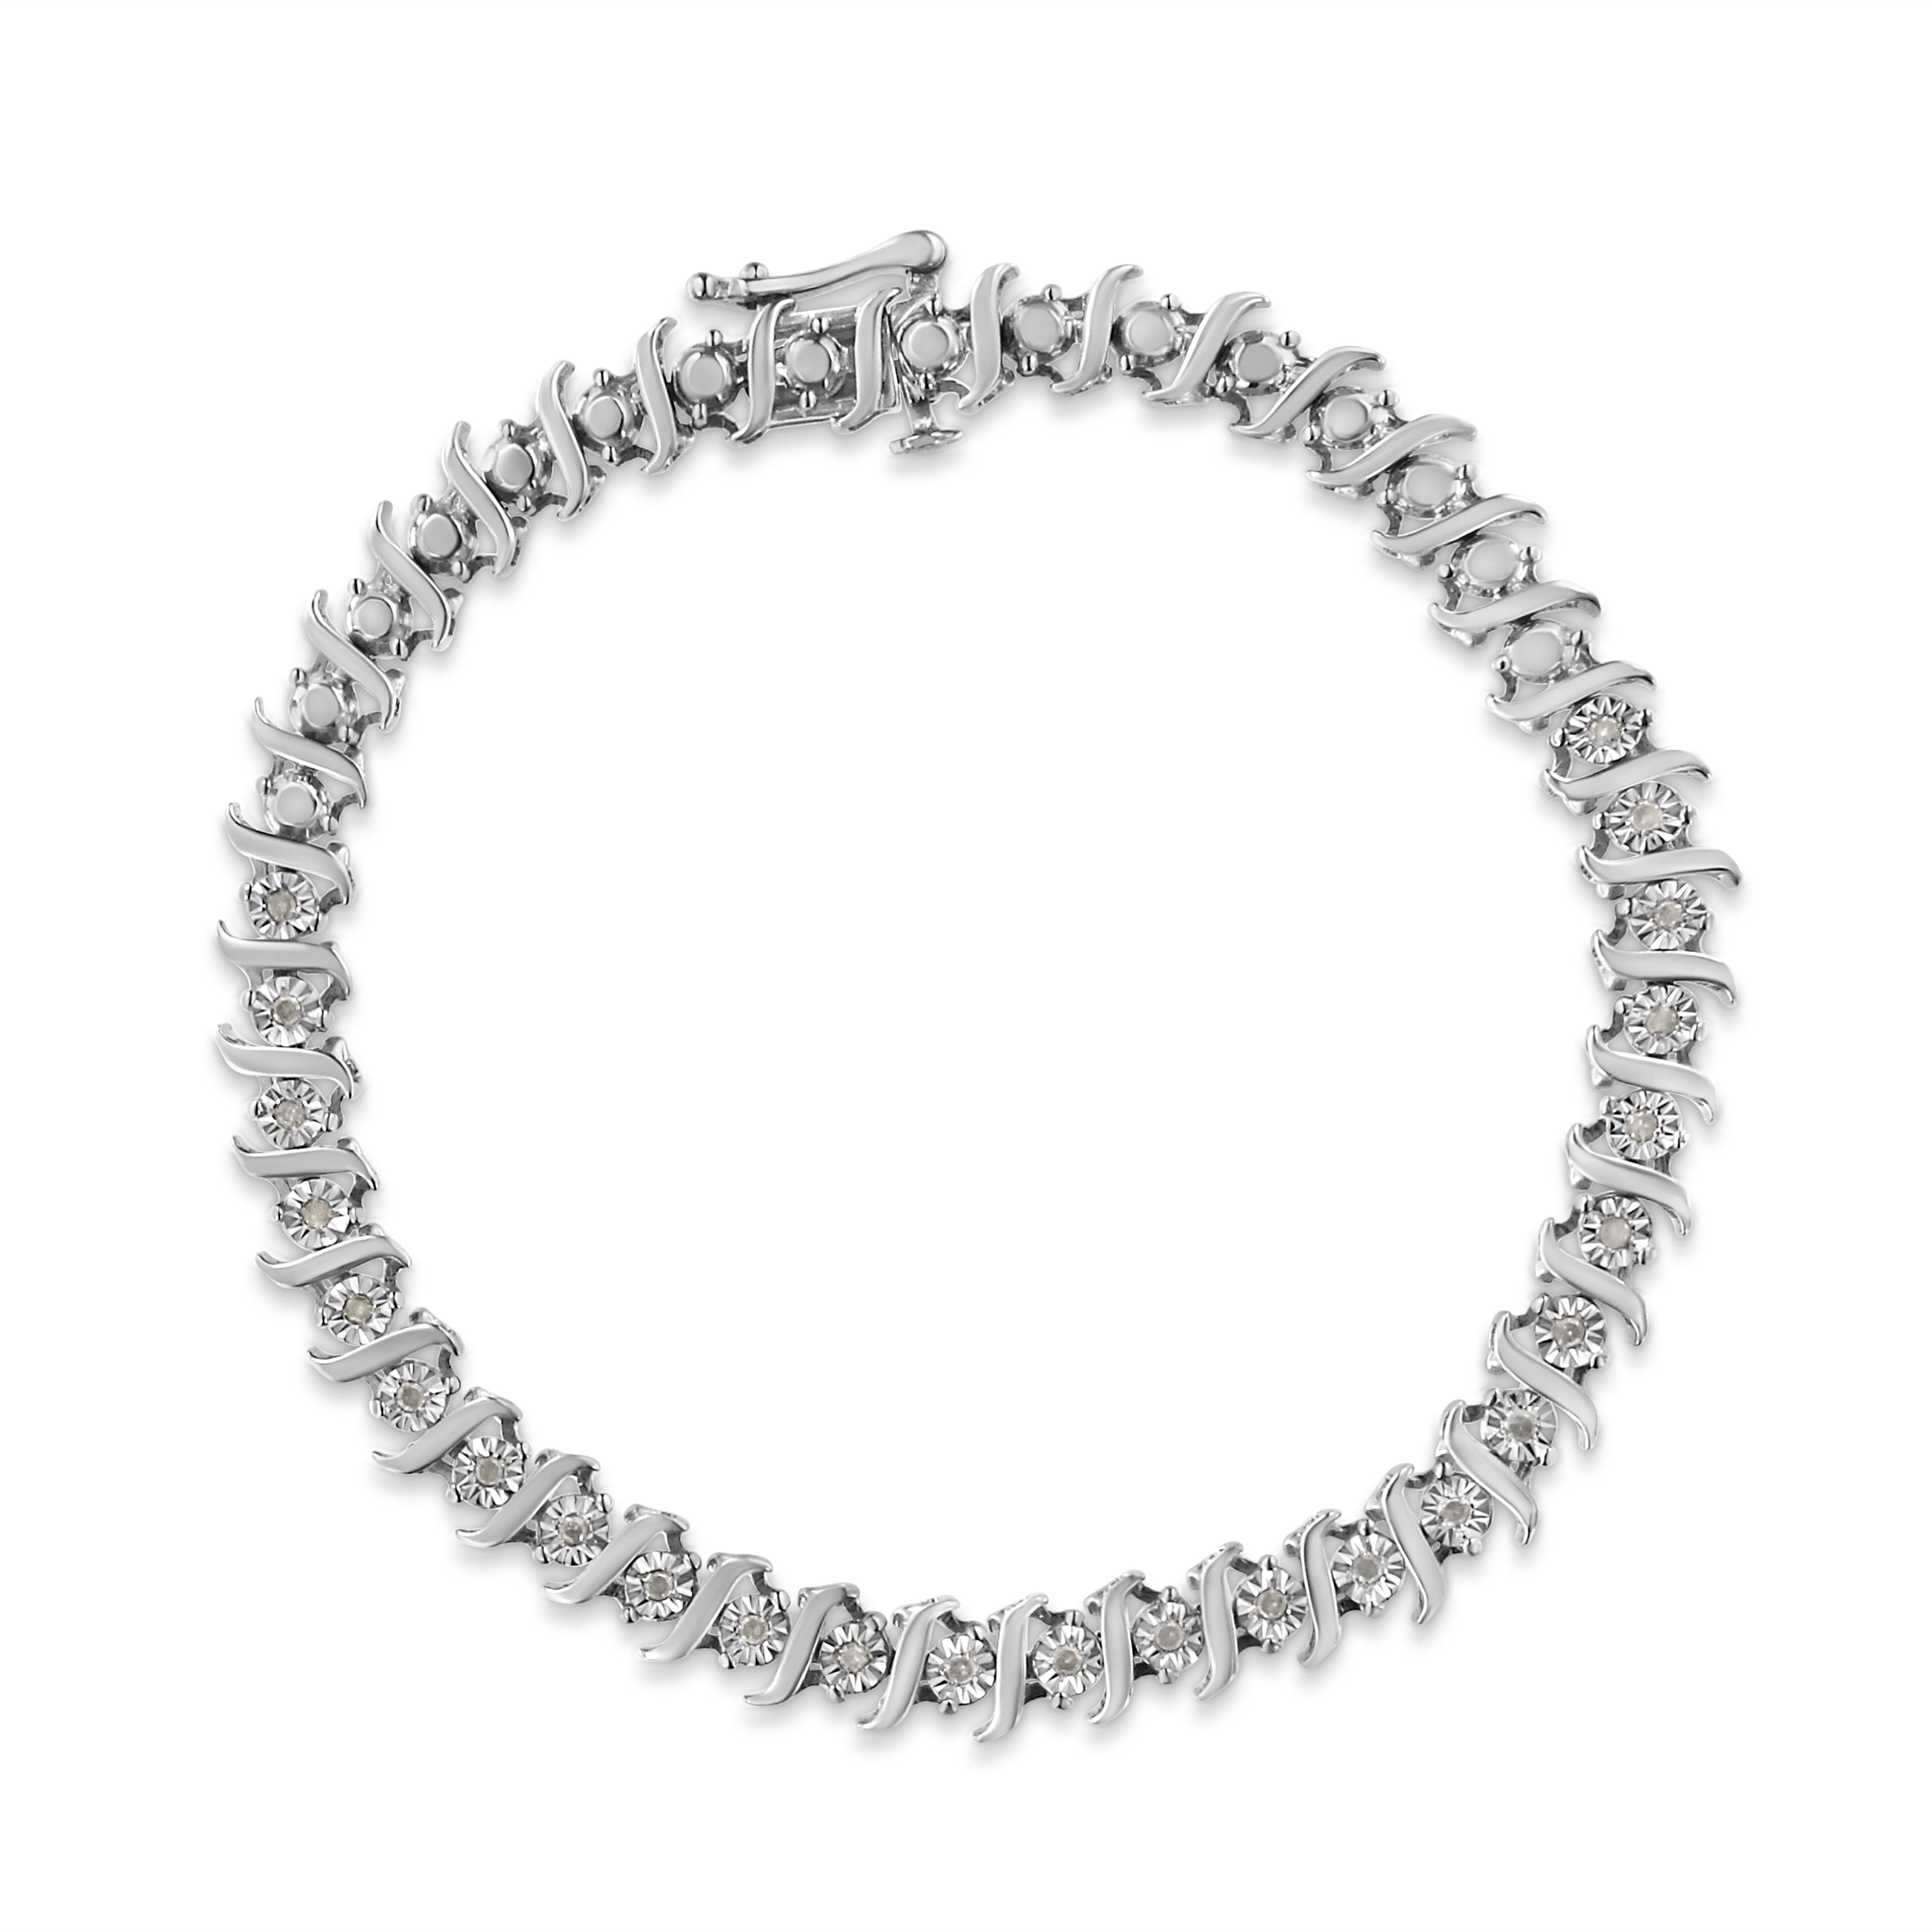 Classic and elegant, this beautiful silver bracelet is designed with an alternating pattern of 